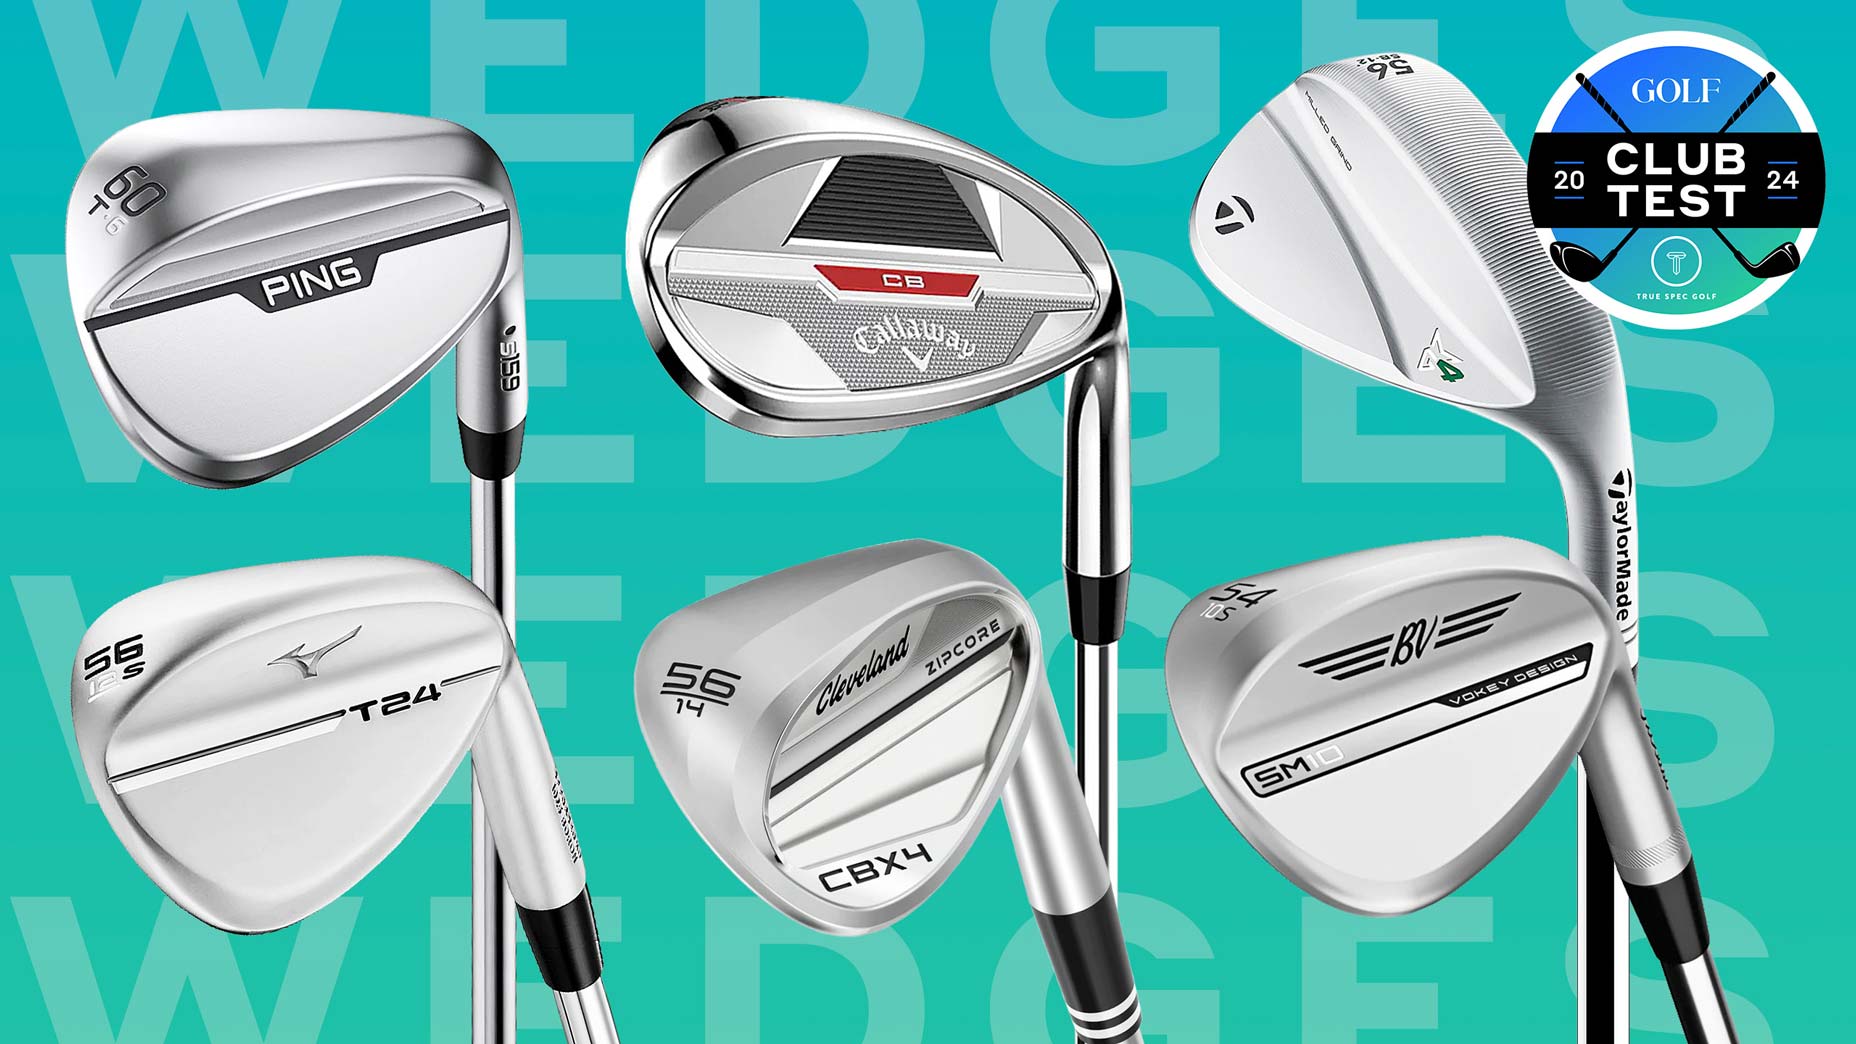 How to get your hands on Titleist Japan's Vokey Forged wedges